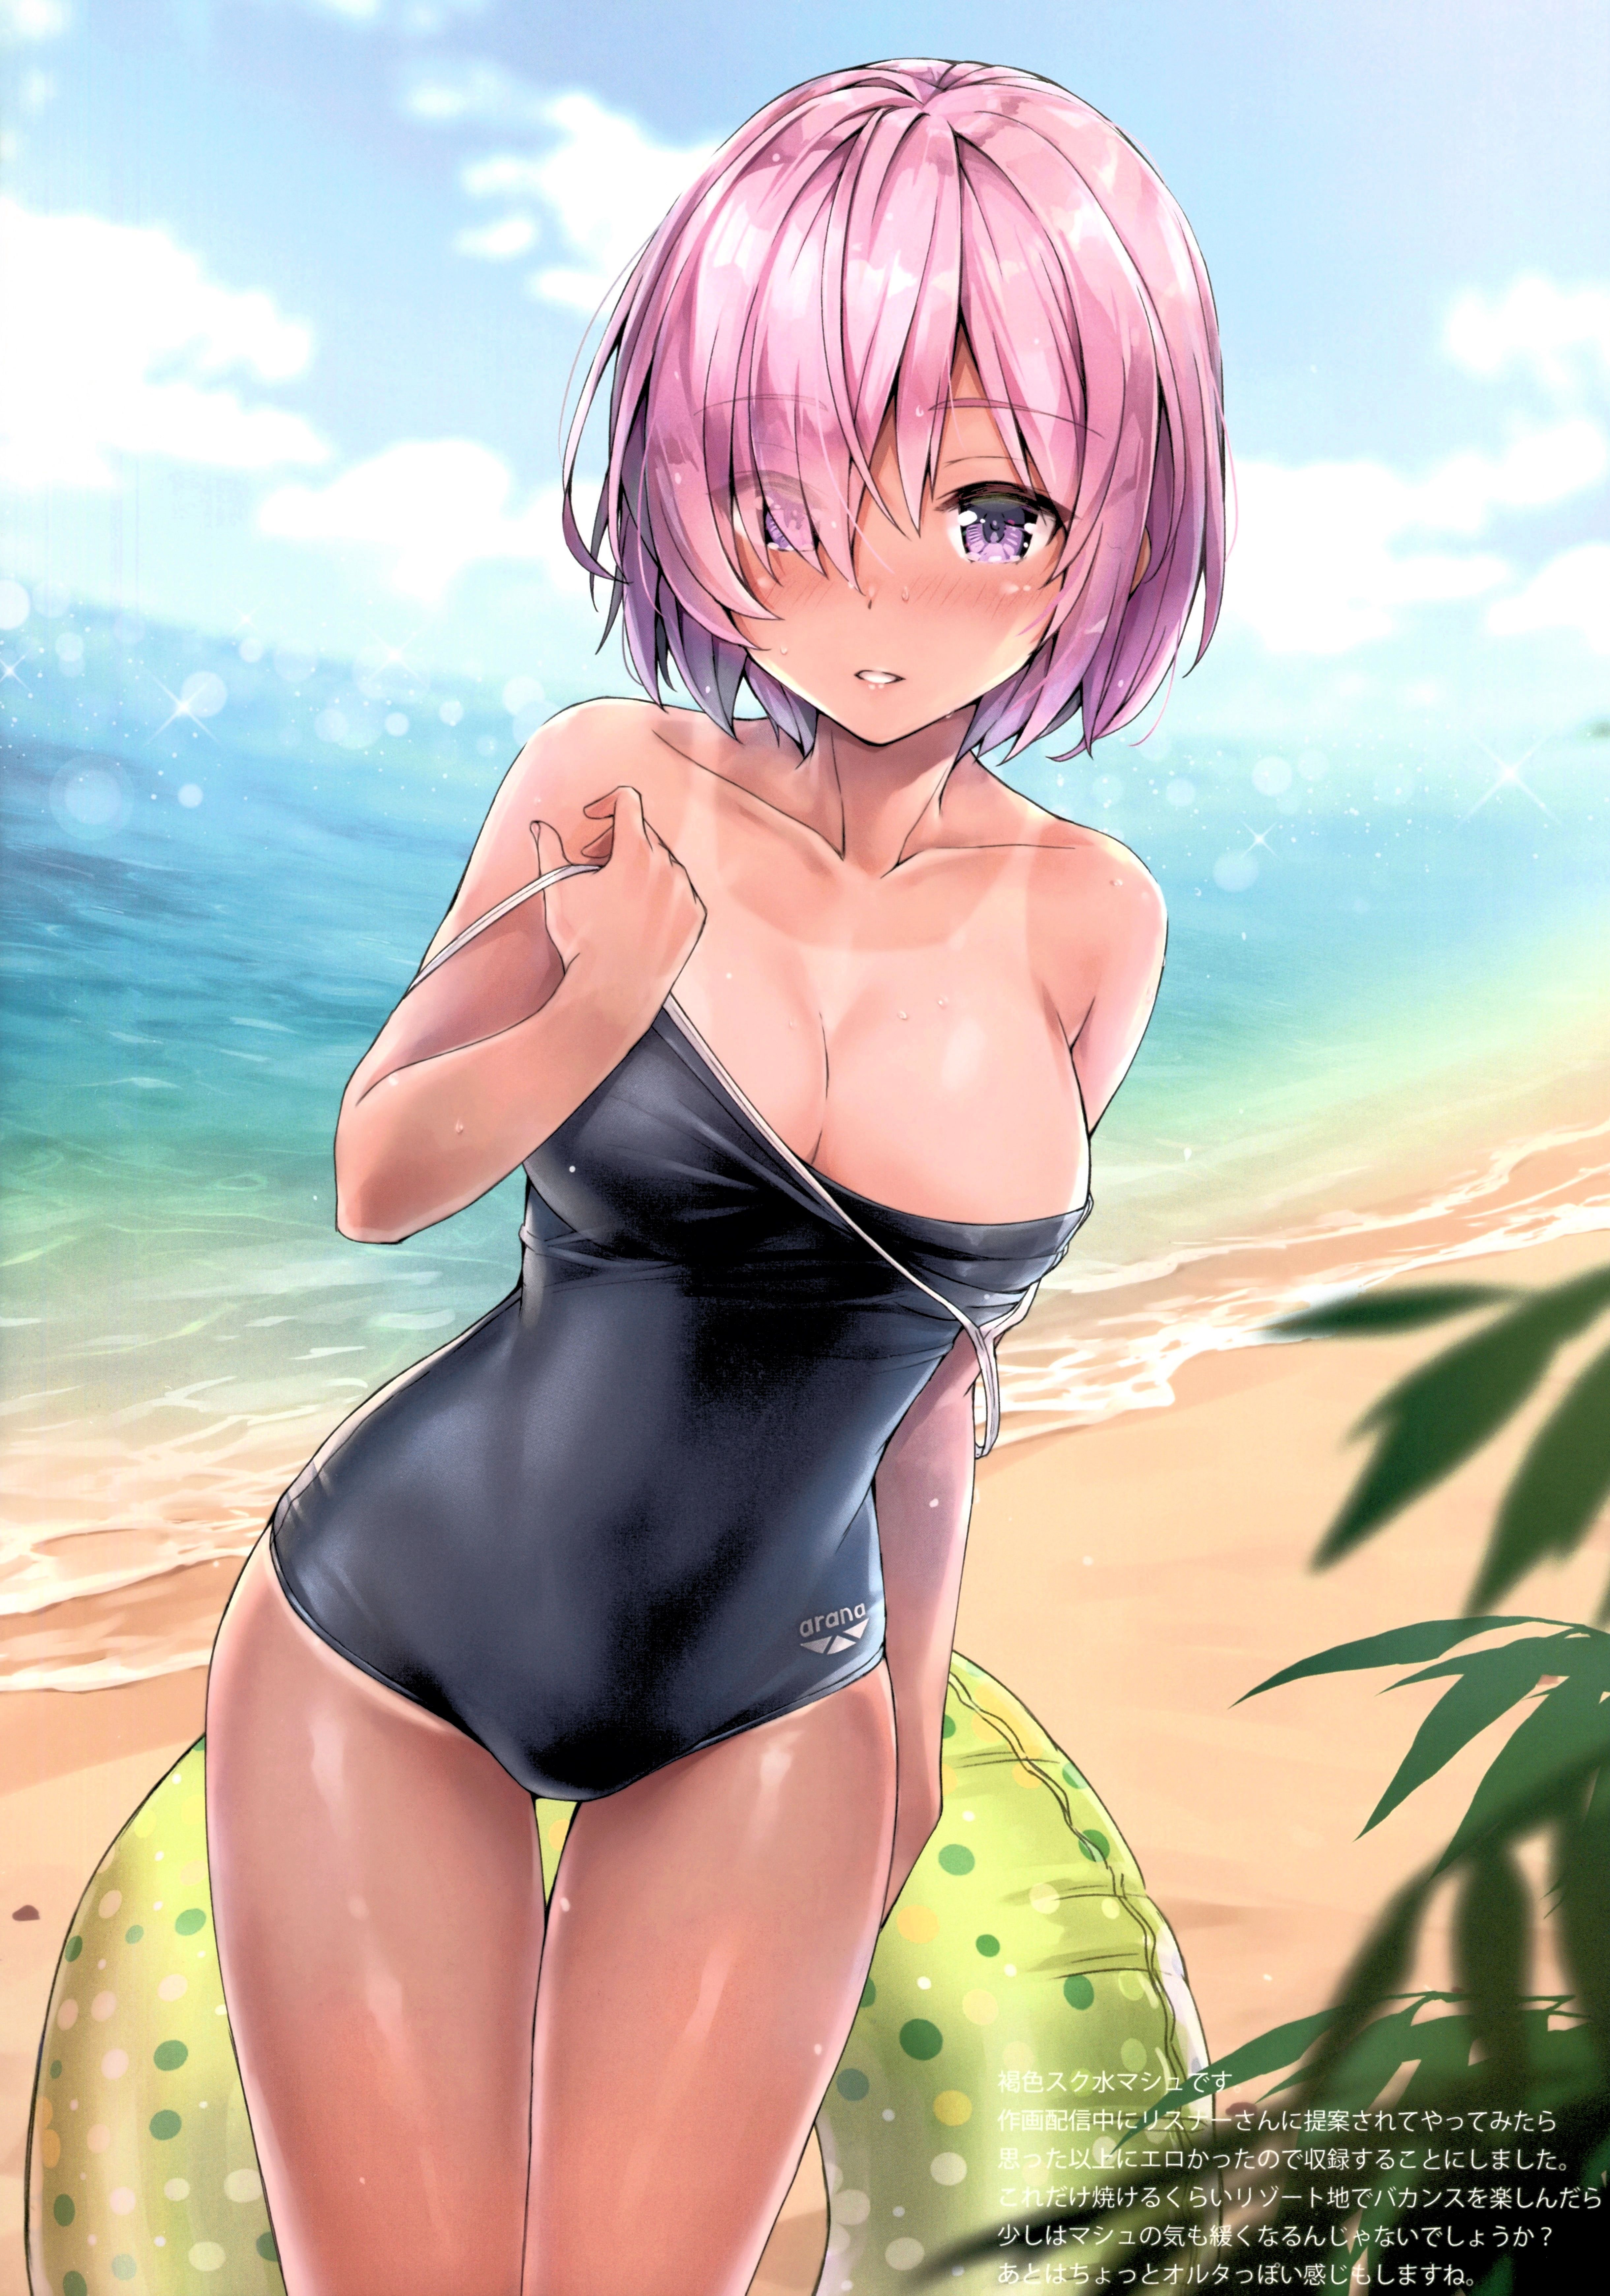 【Erotic Anime Summary】 Valley erotic images of busty beauties 【50 photos】 39